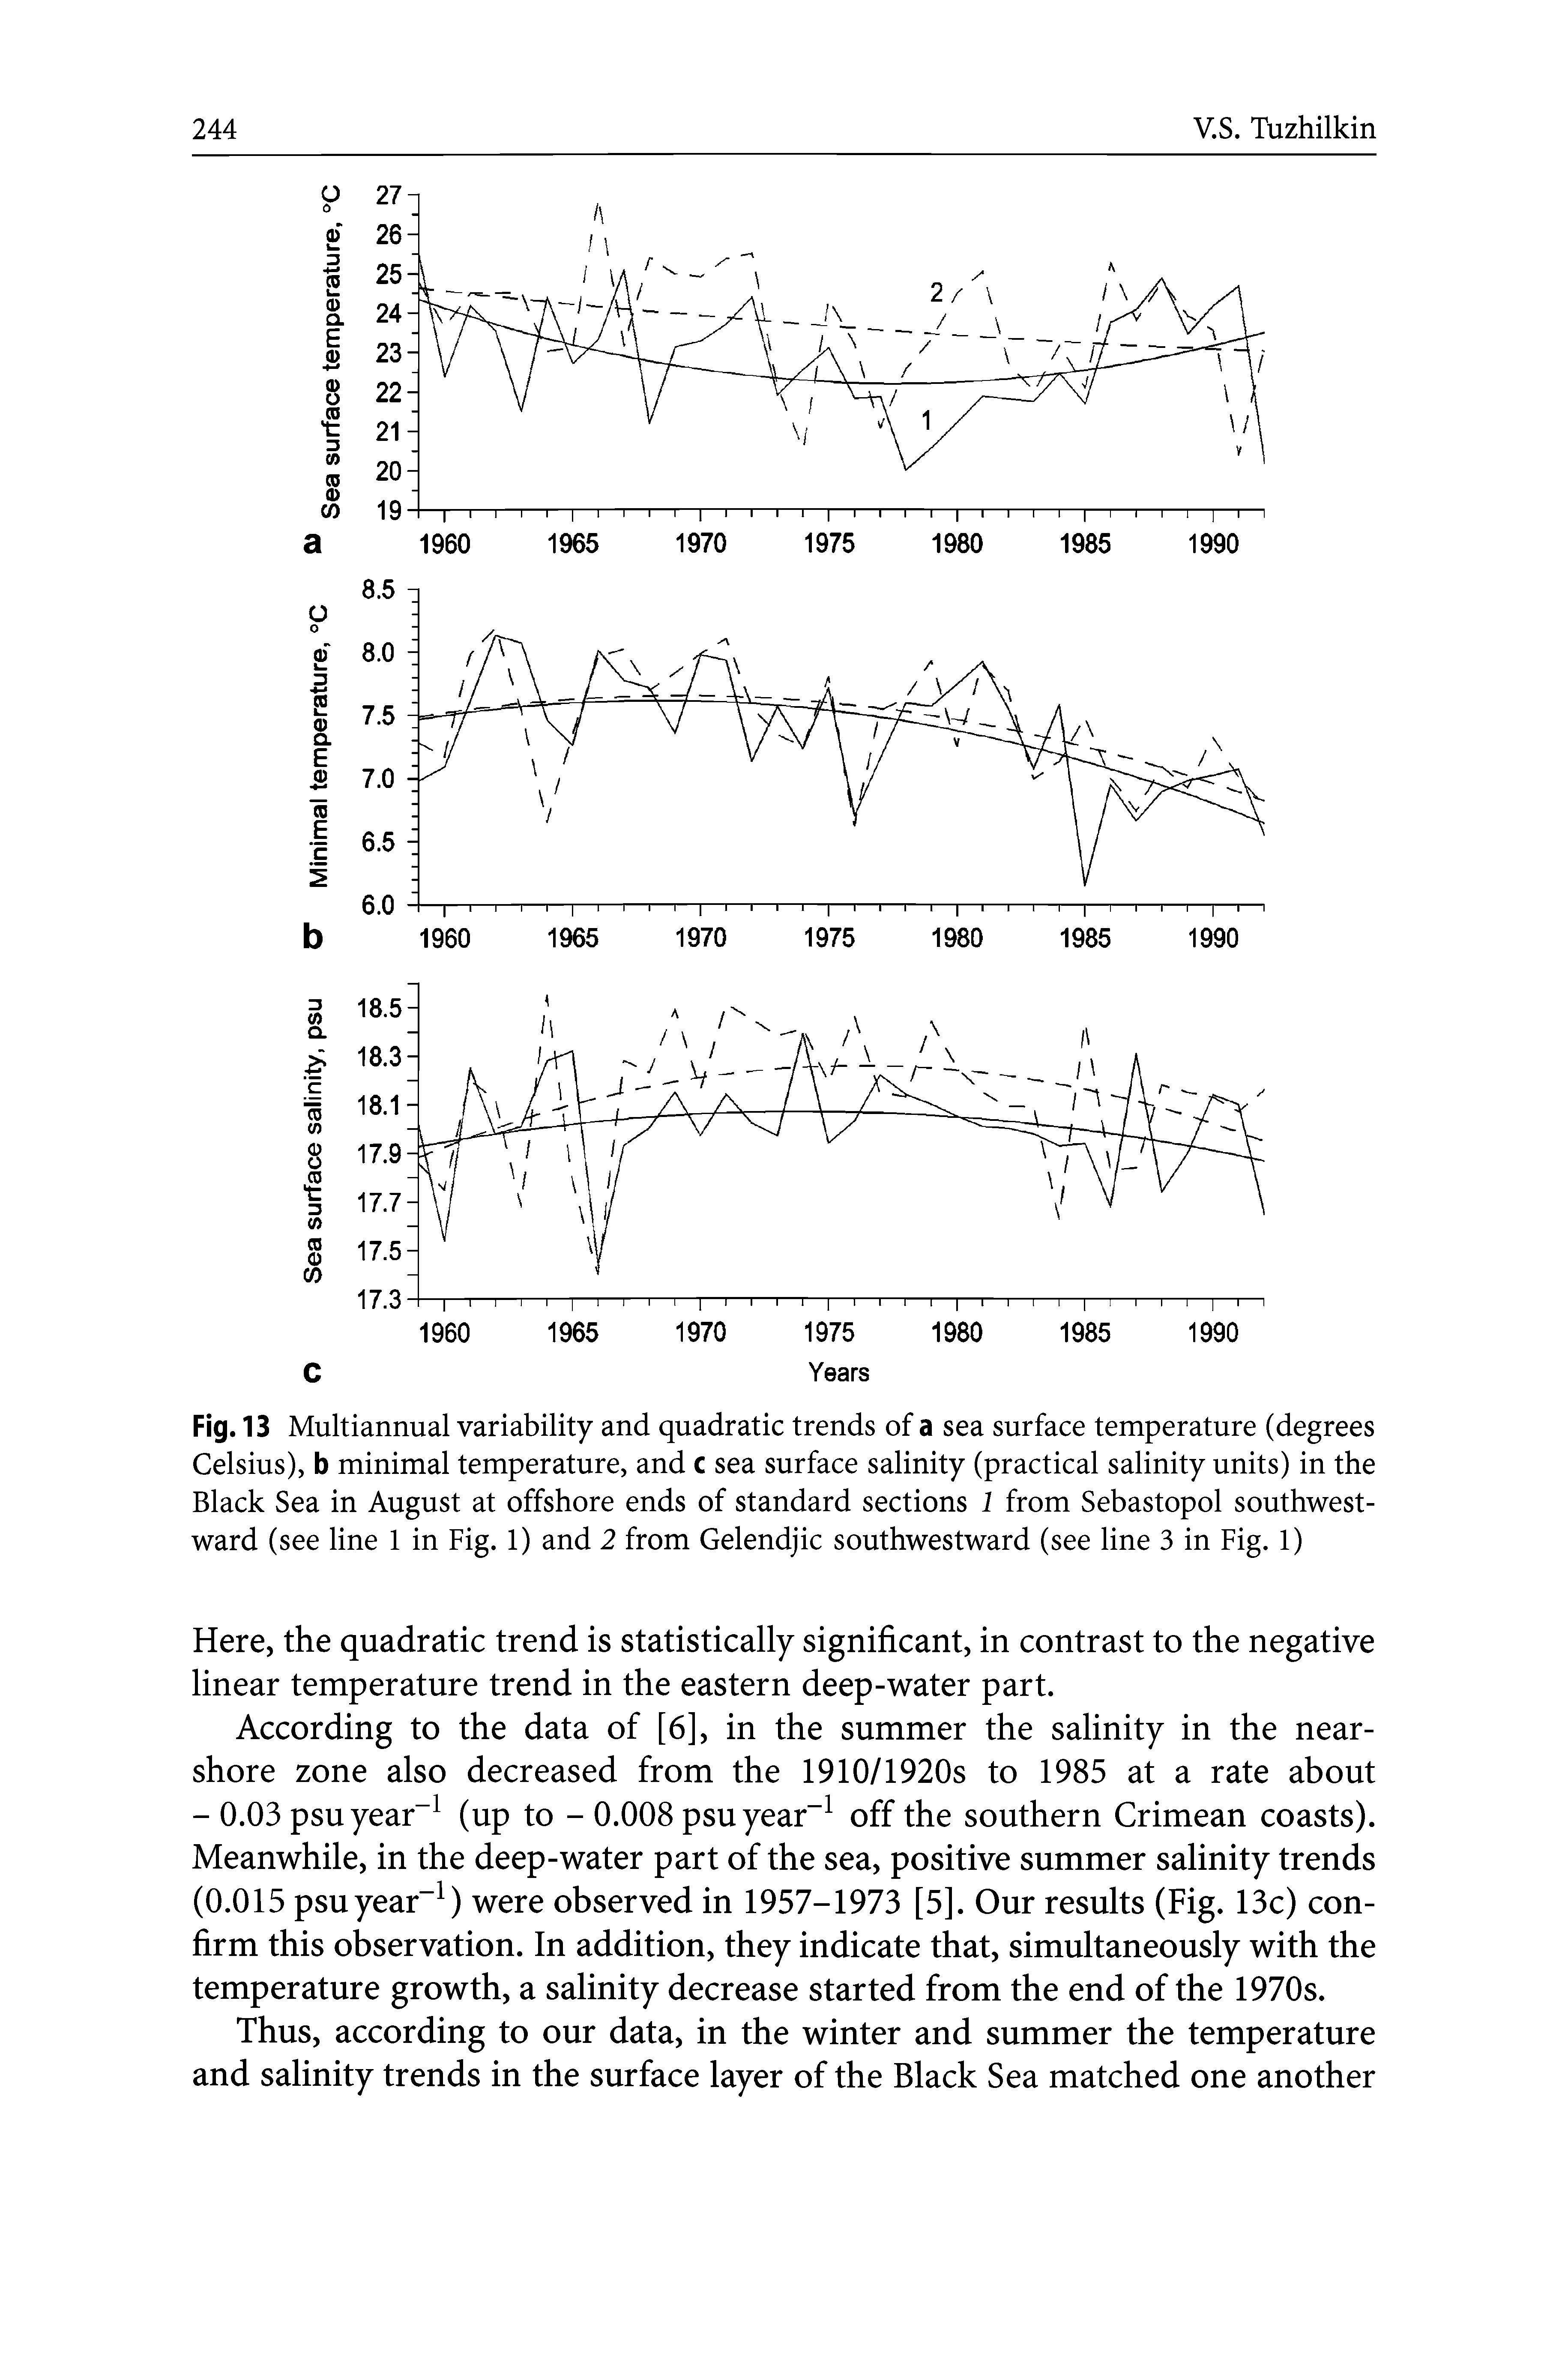 Fig. 13 Multiannual variability and quadratic trends of a sea surface temperature (degrees Celsius), b minimal temperature, and c sea surface salinity (practical salinity units) in the Black Sea in August at offshore ends of standard sections 1 from Sebastopol southwest-ward (see line 1 in Fig. 1) and 2 from Gelendjic southwestward (see line 3 in Fig. 1)...